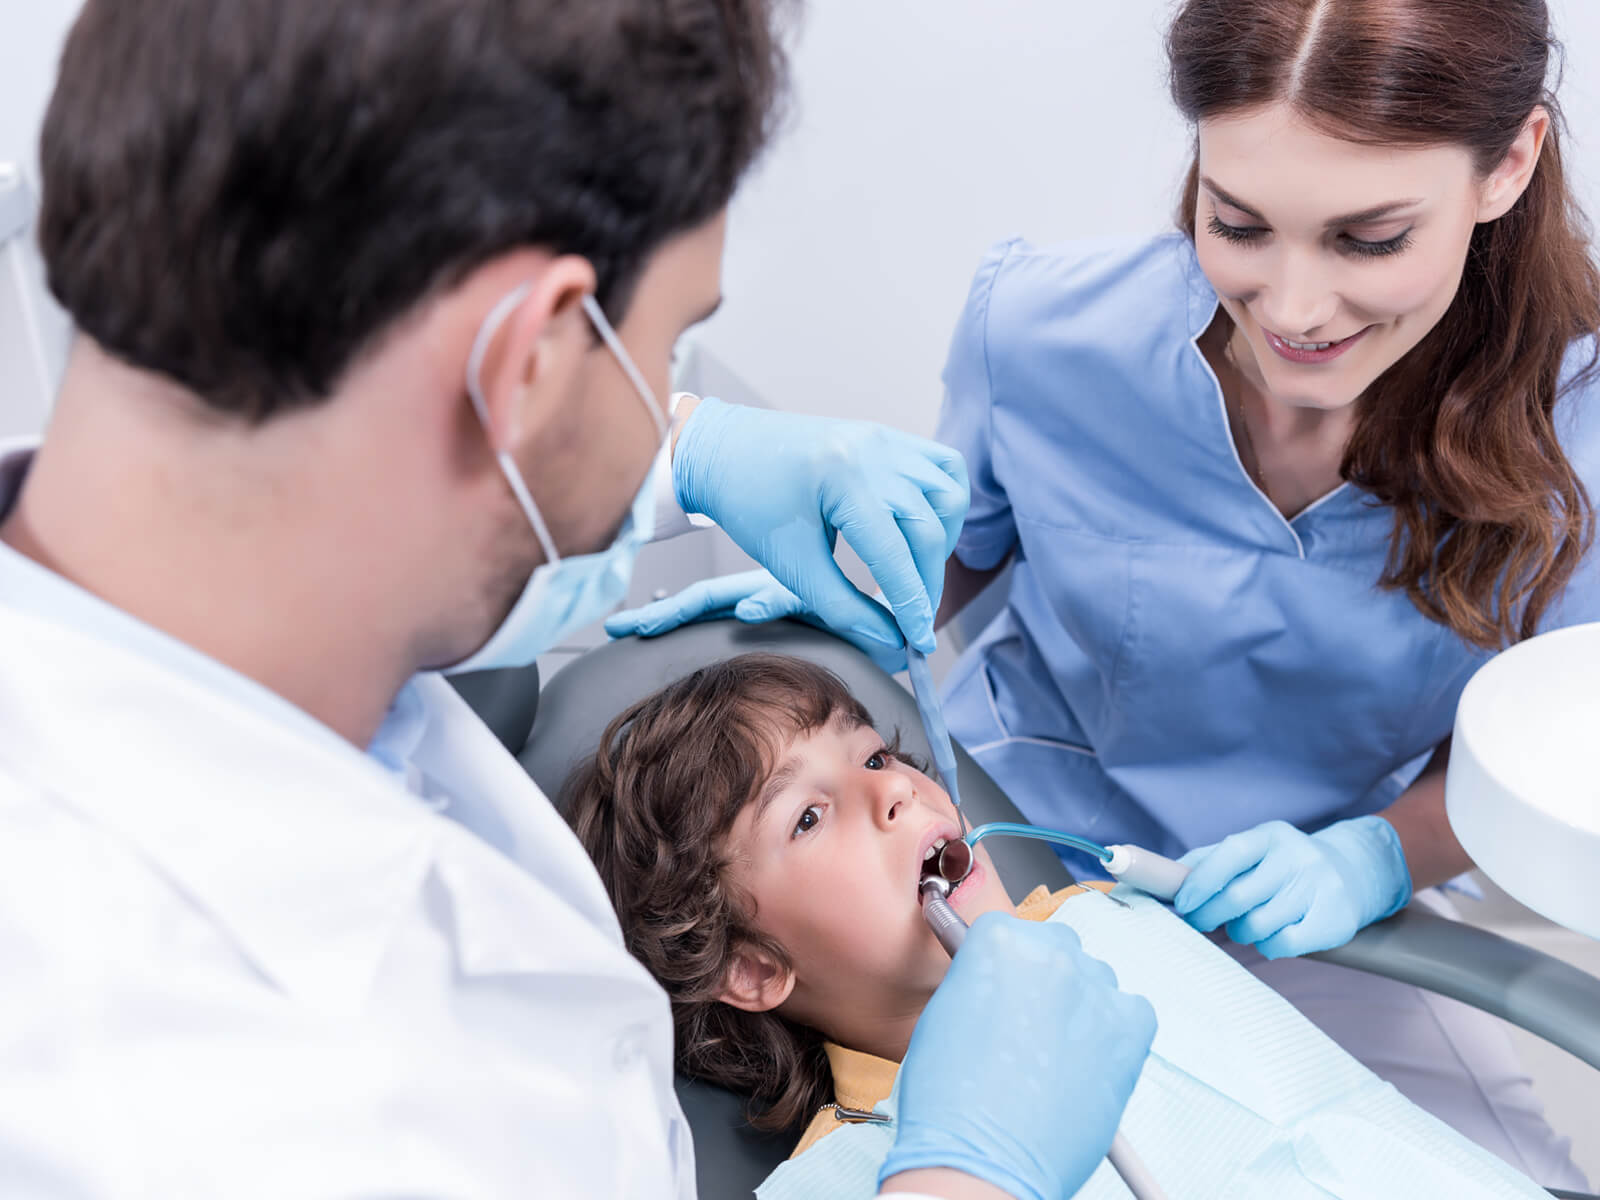 How Can I Strengthen My Kids Teeth Naturally?